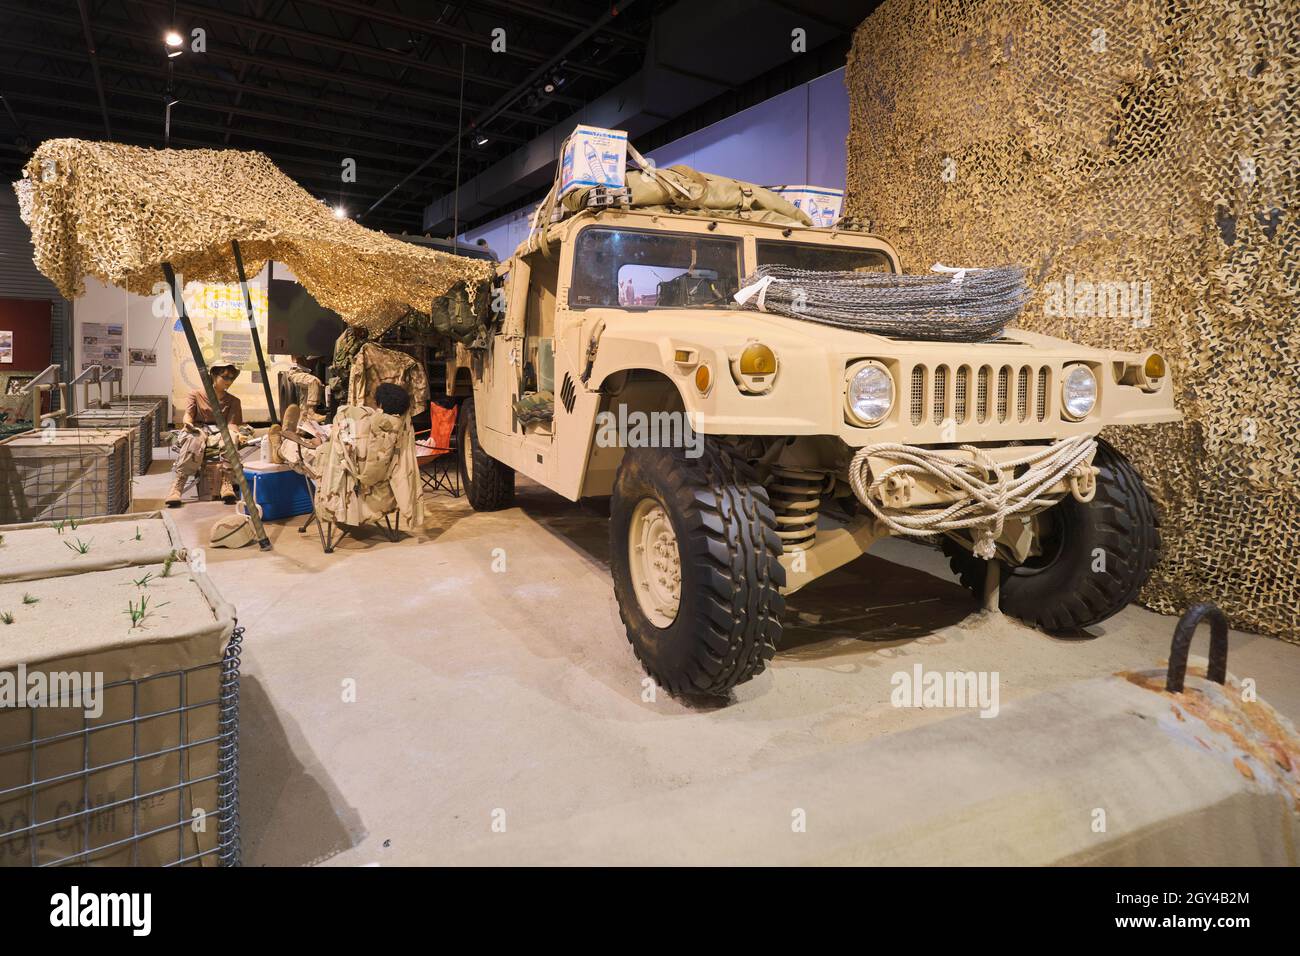 An HMMWV, Humvee vehicle, part of an encampment during Desert Storm. At the US Army Transportation Museum at Fort Eustis, Virginia. Stock Photo